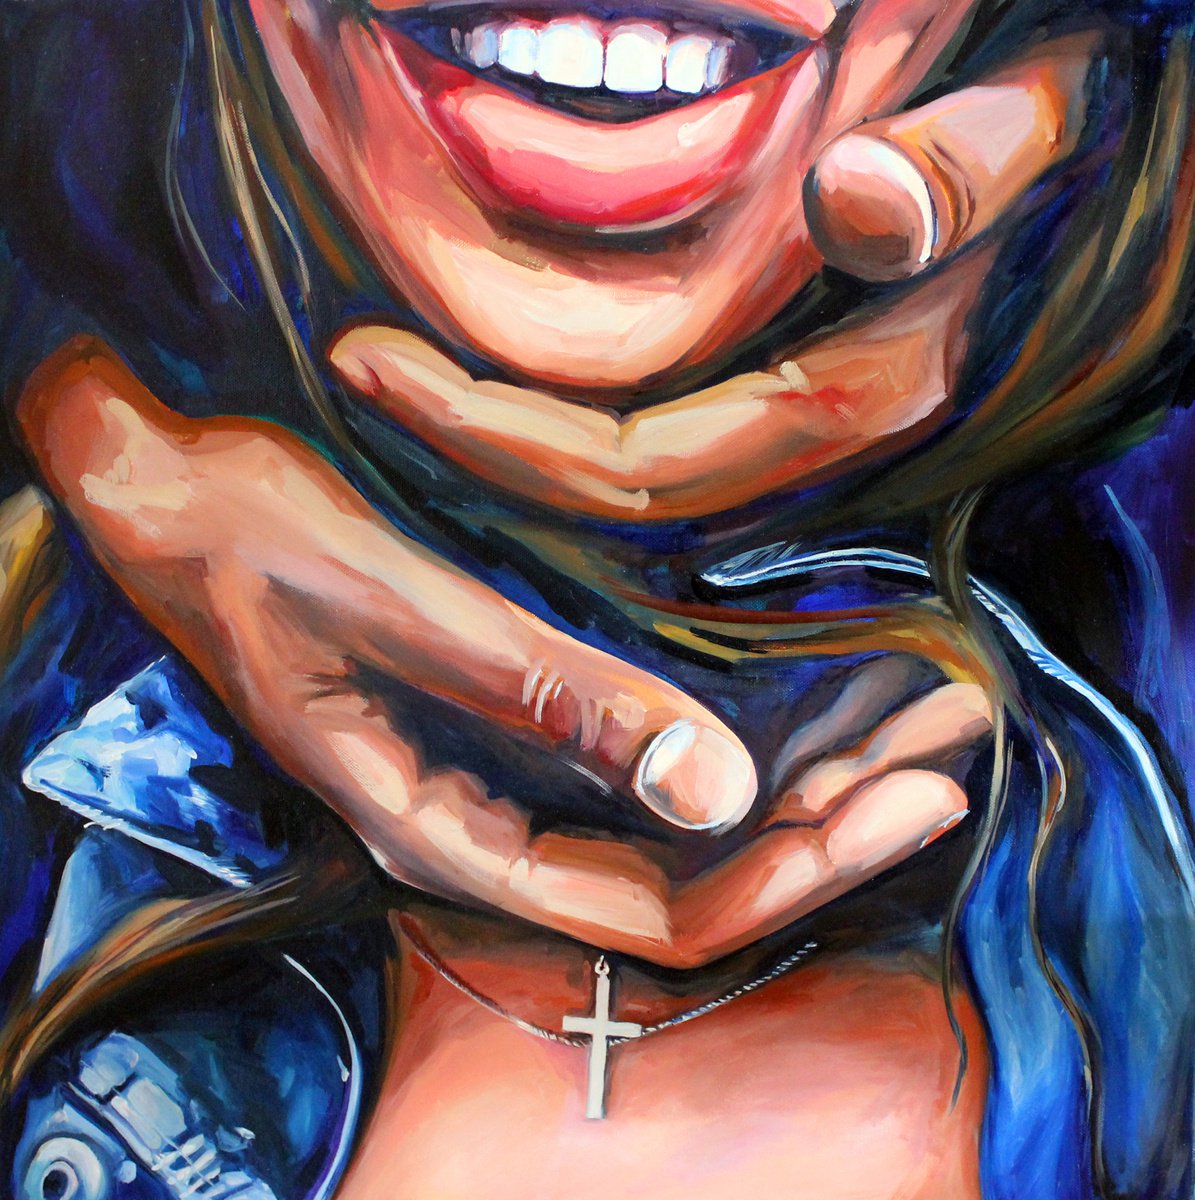 I WANT YOU TO SMILE - oil painting hands smile woman lips blue jeans home decor office dec... by Sasha Robinson